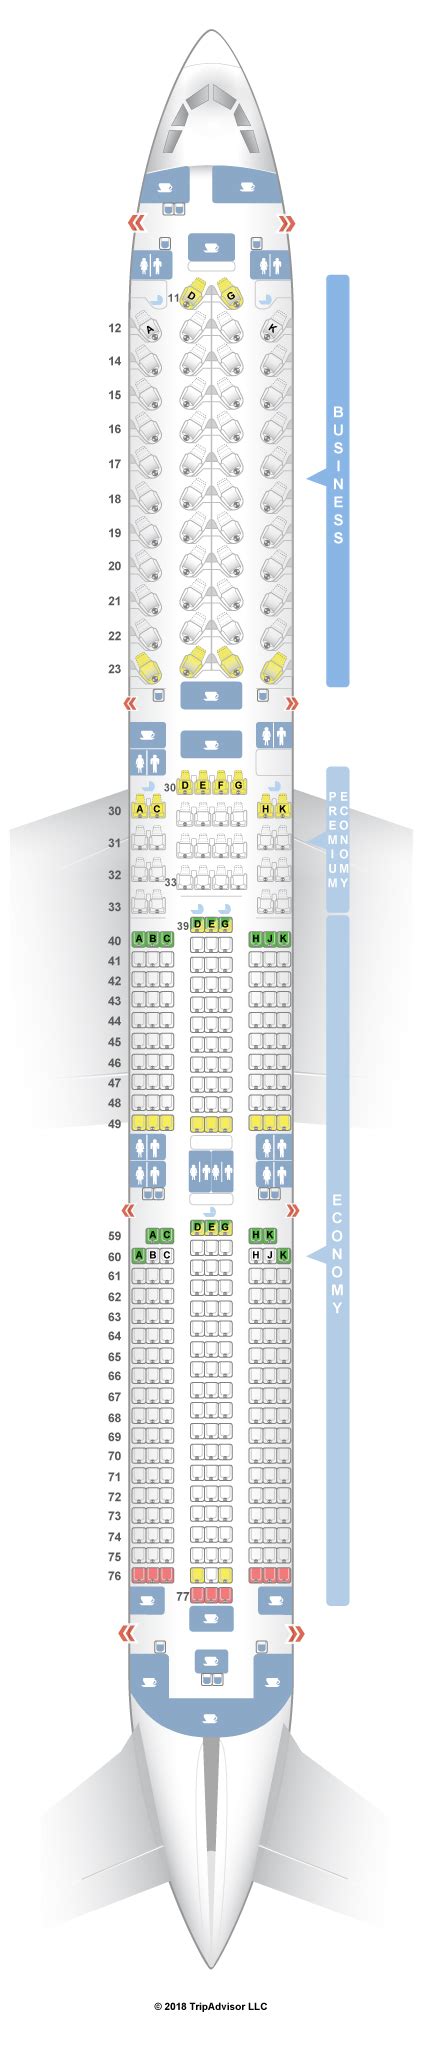 Cathay Pacific Airbus A359 Jet Seating Plan